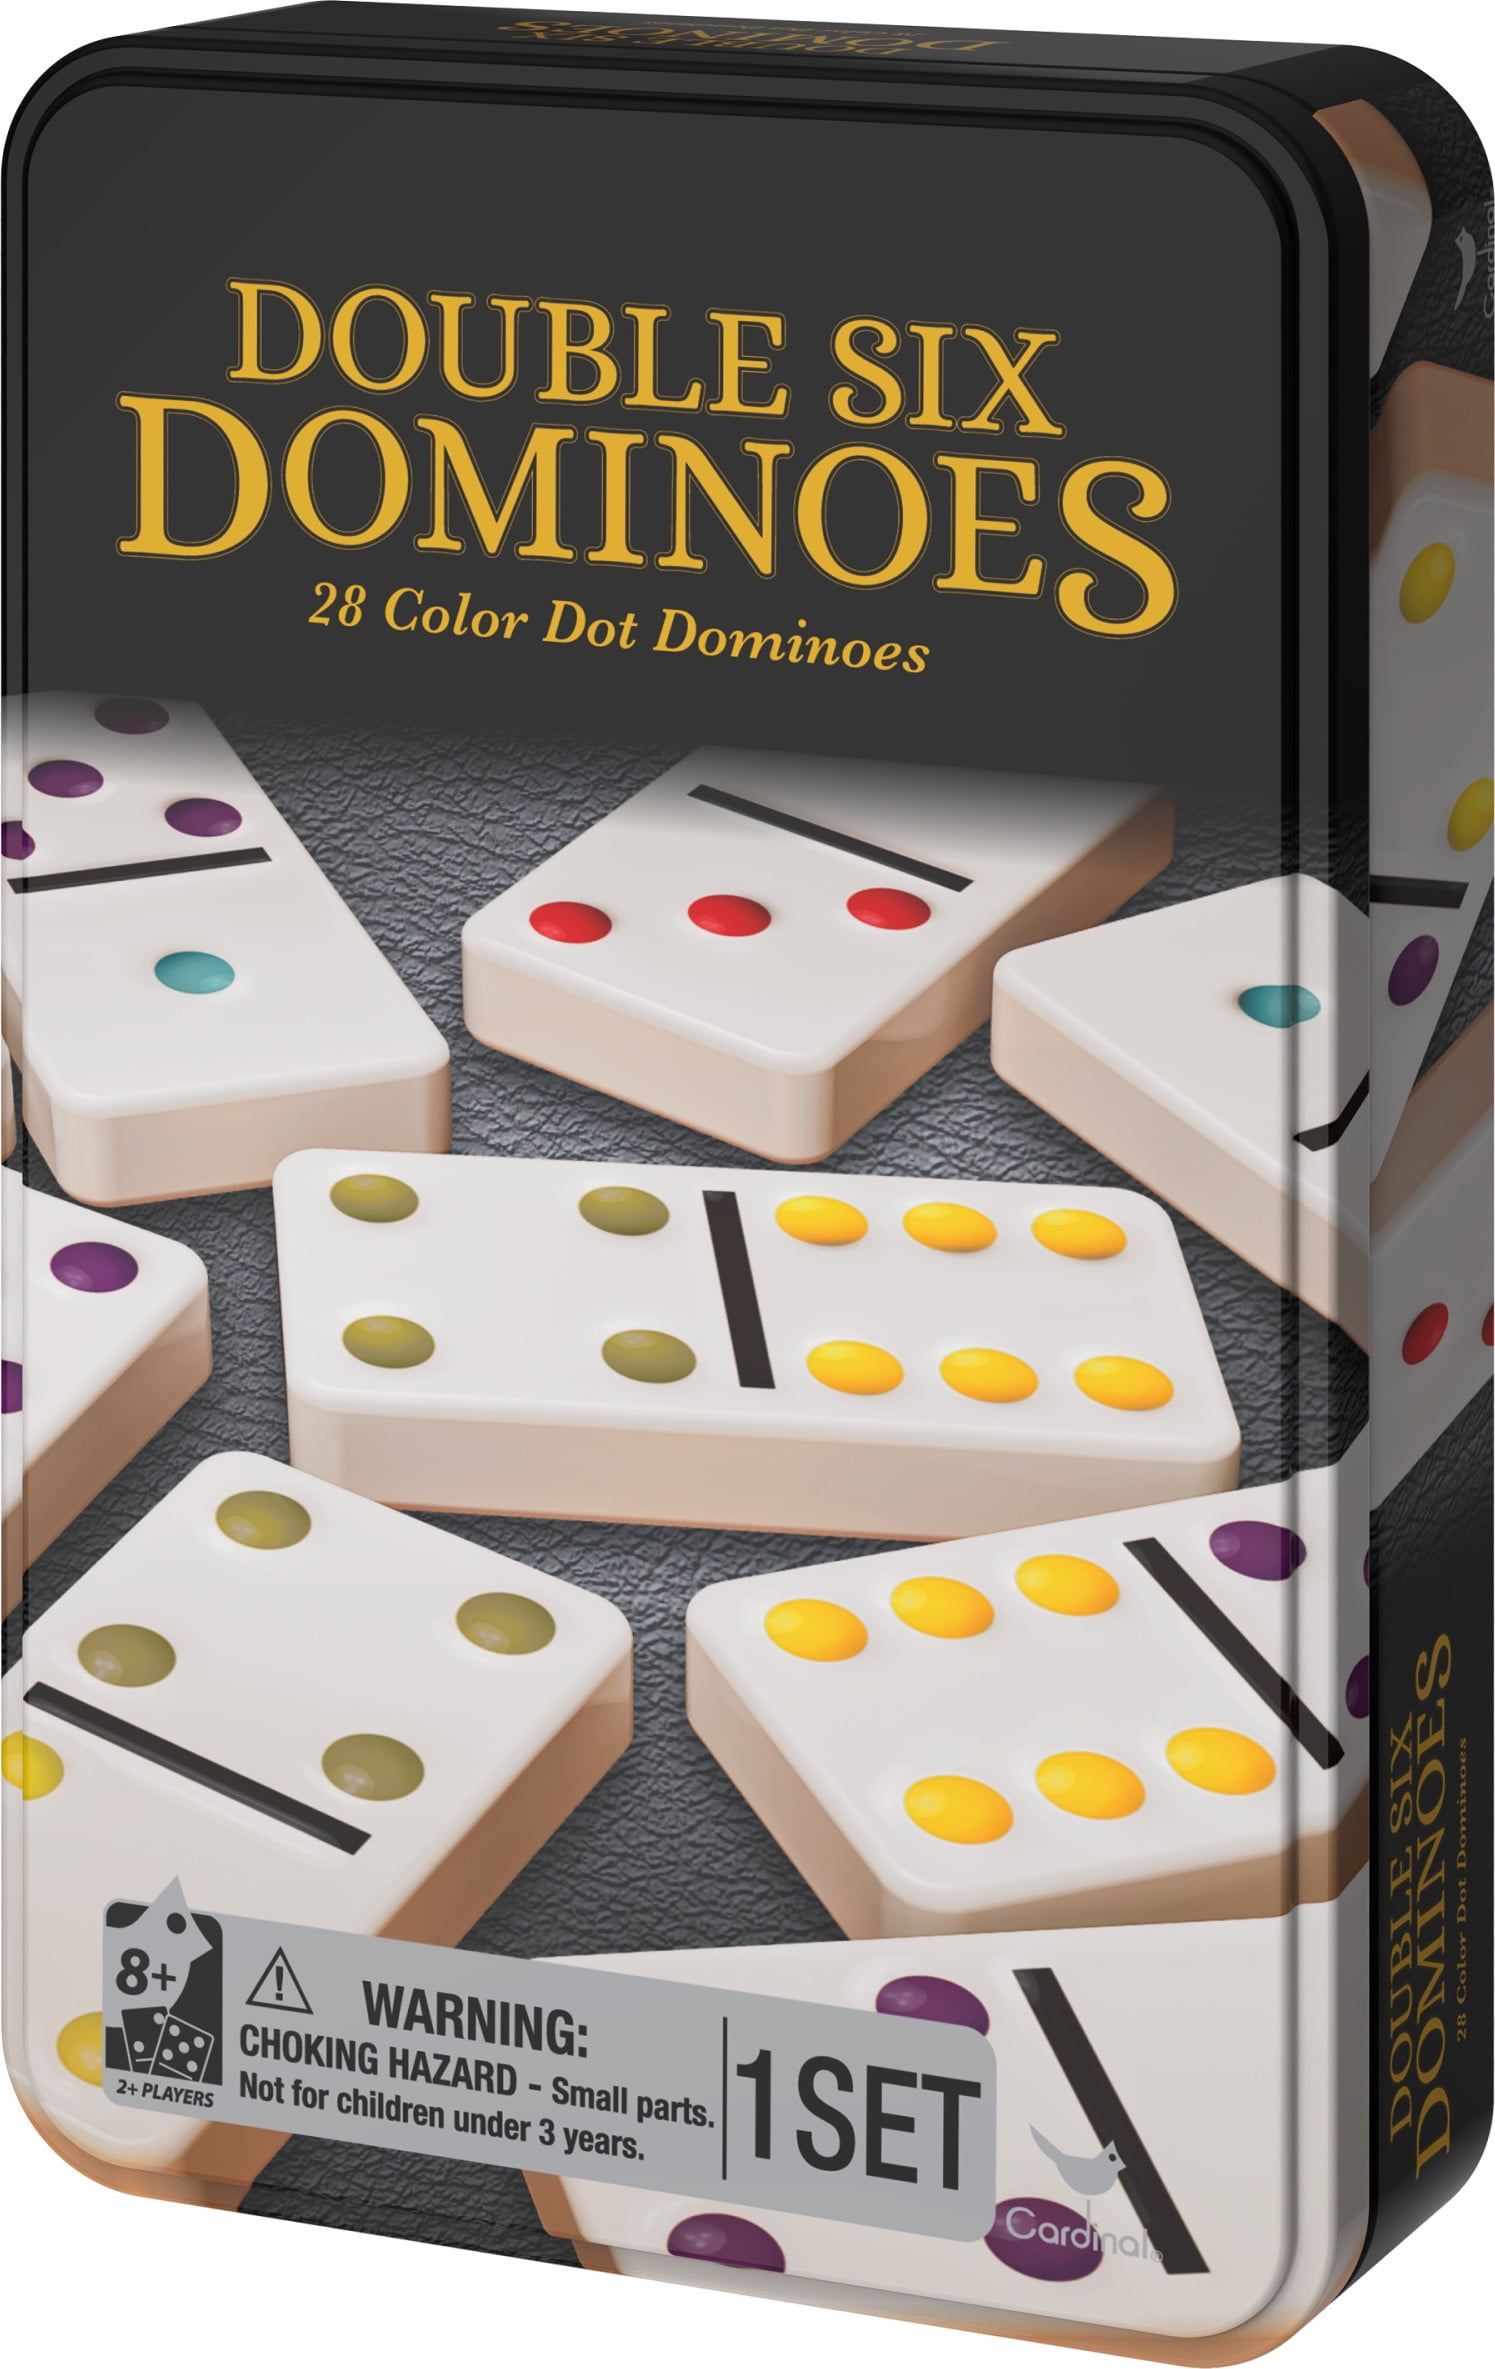 2 In 1 Games Double Six Dominoes & 2 Packs of Playing Cards Board Games 